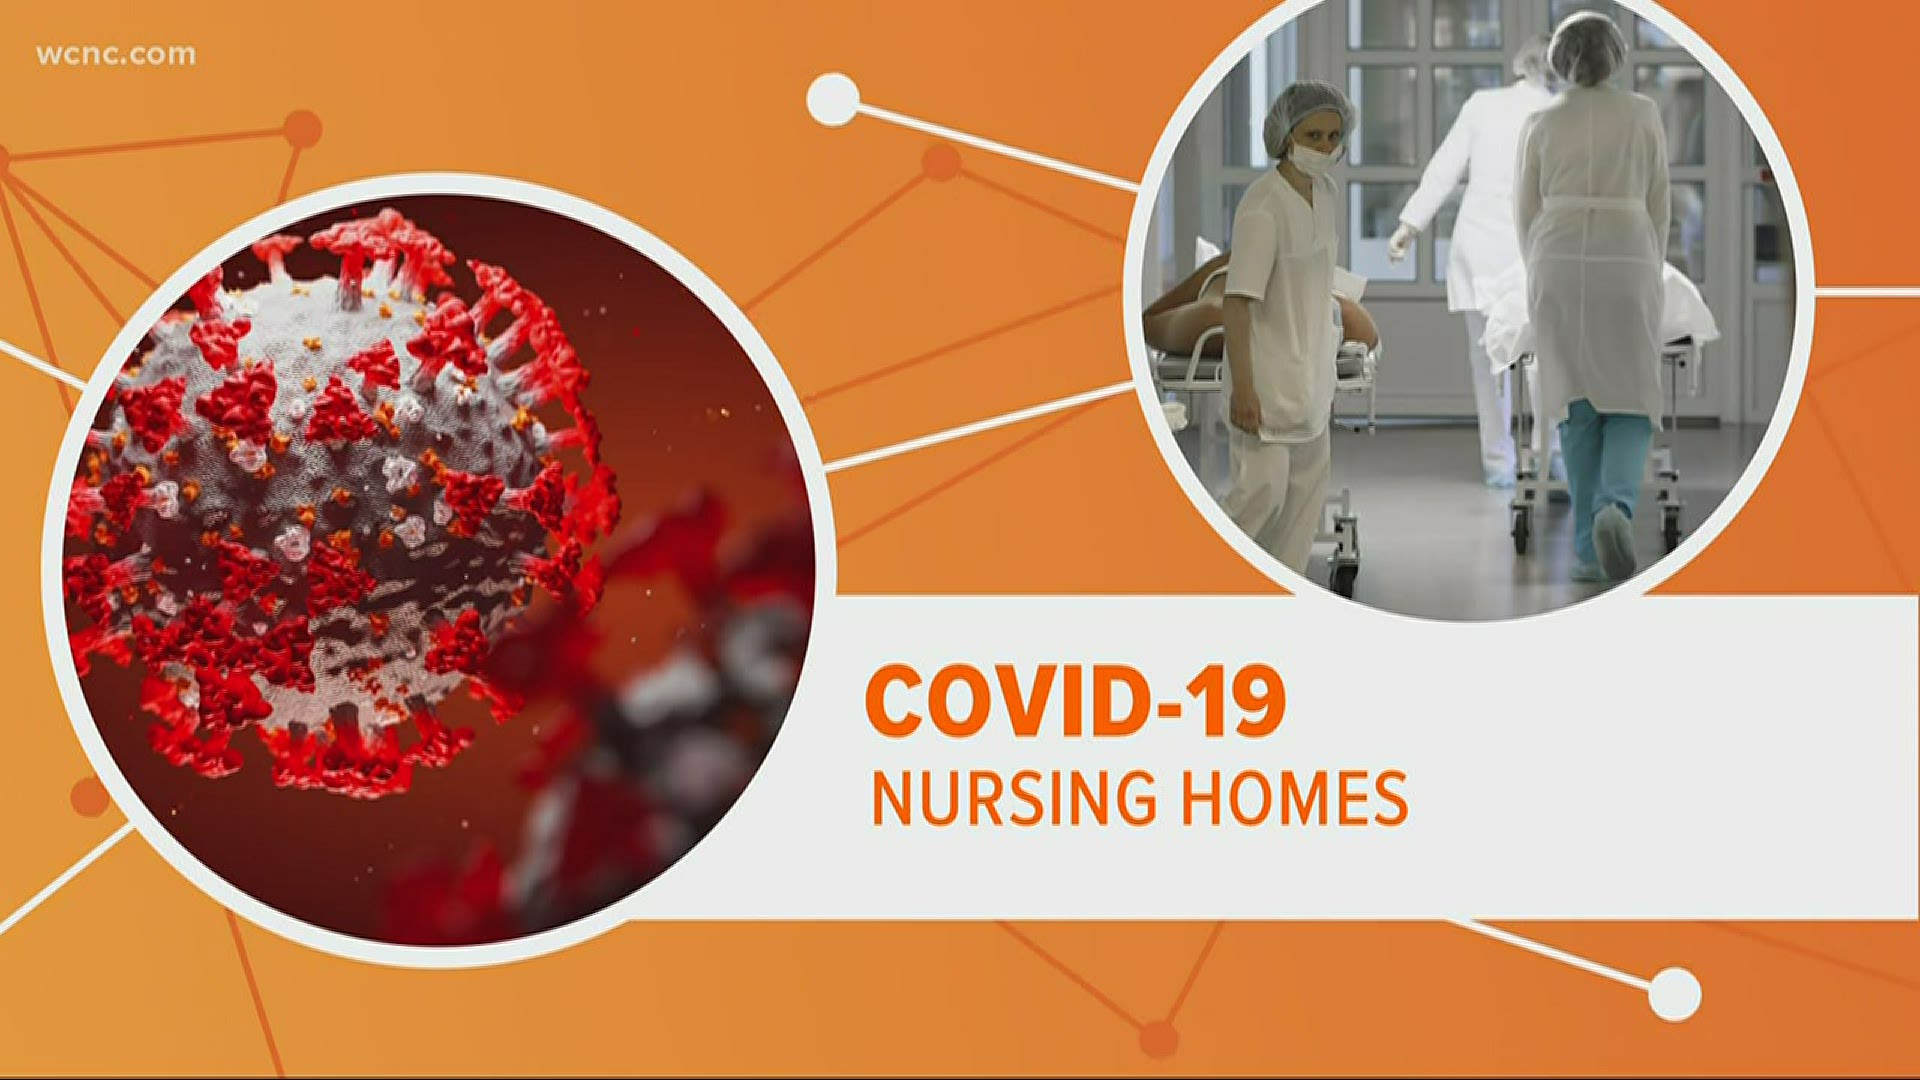 Nursing homes across the U.S. have been hit hard by the coronavirus outbreak. But a lot of the issues go beyond the age of the residents.